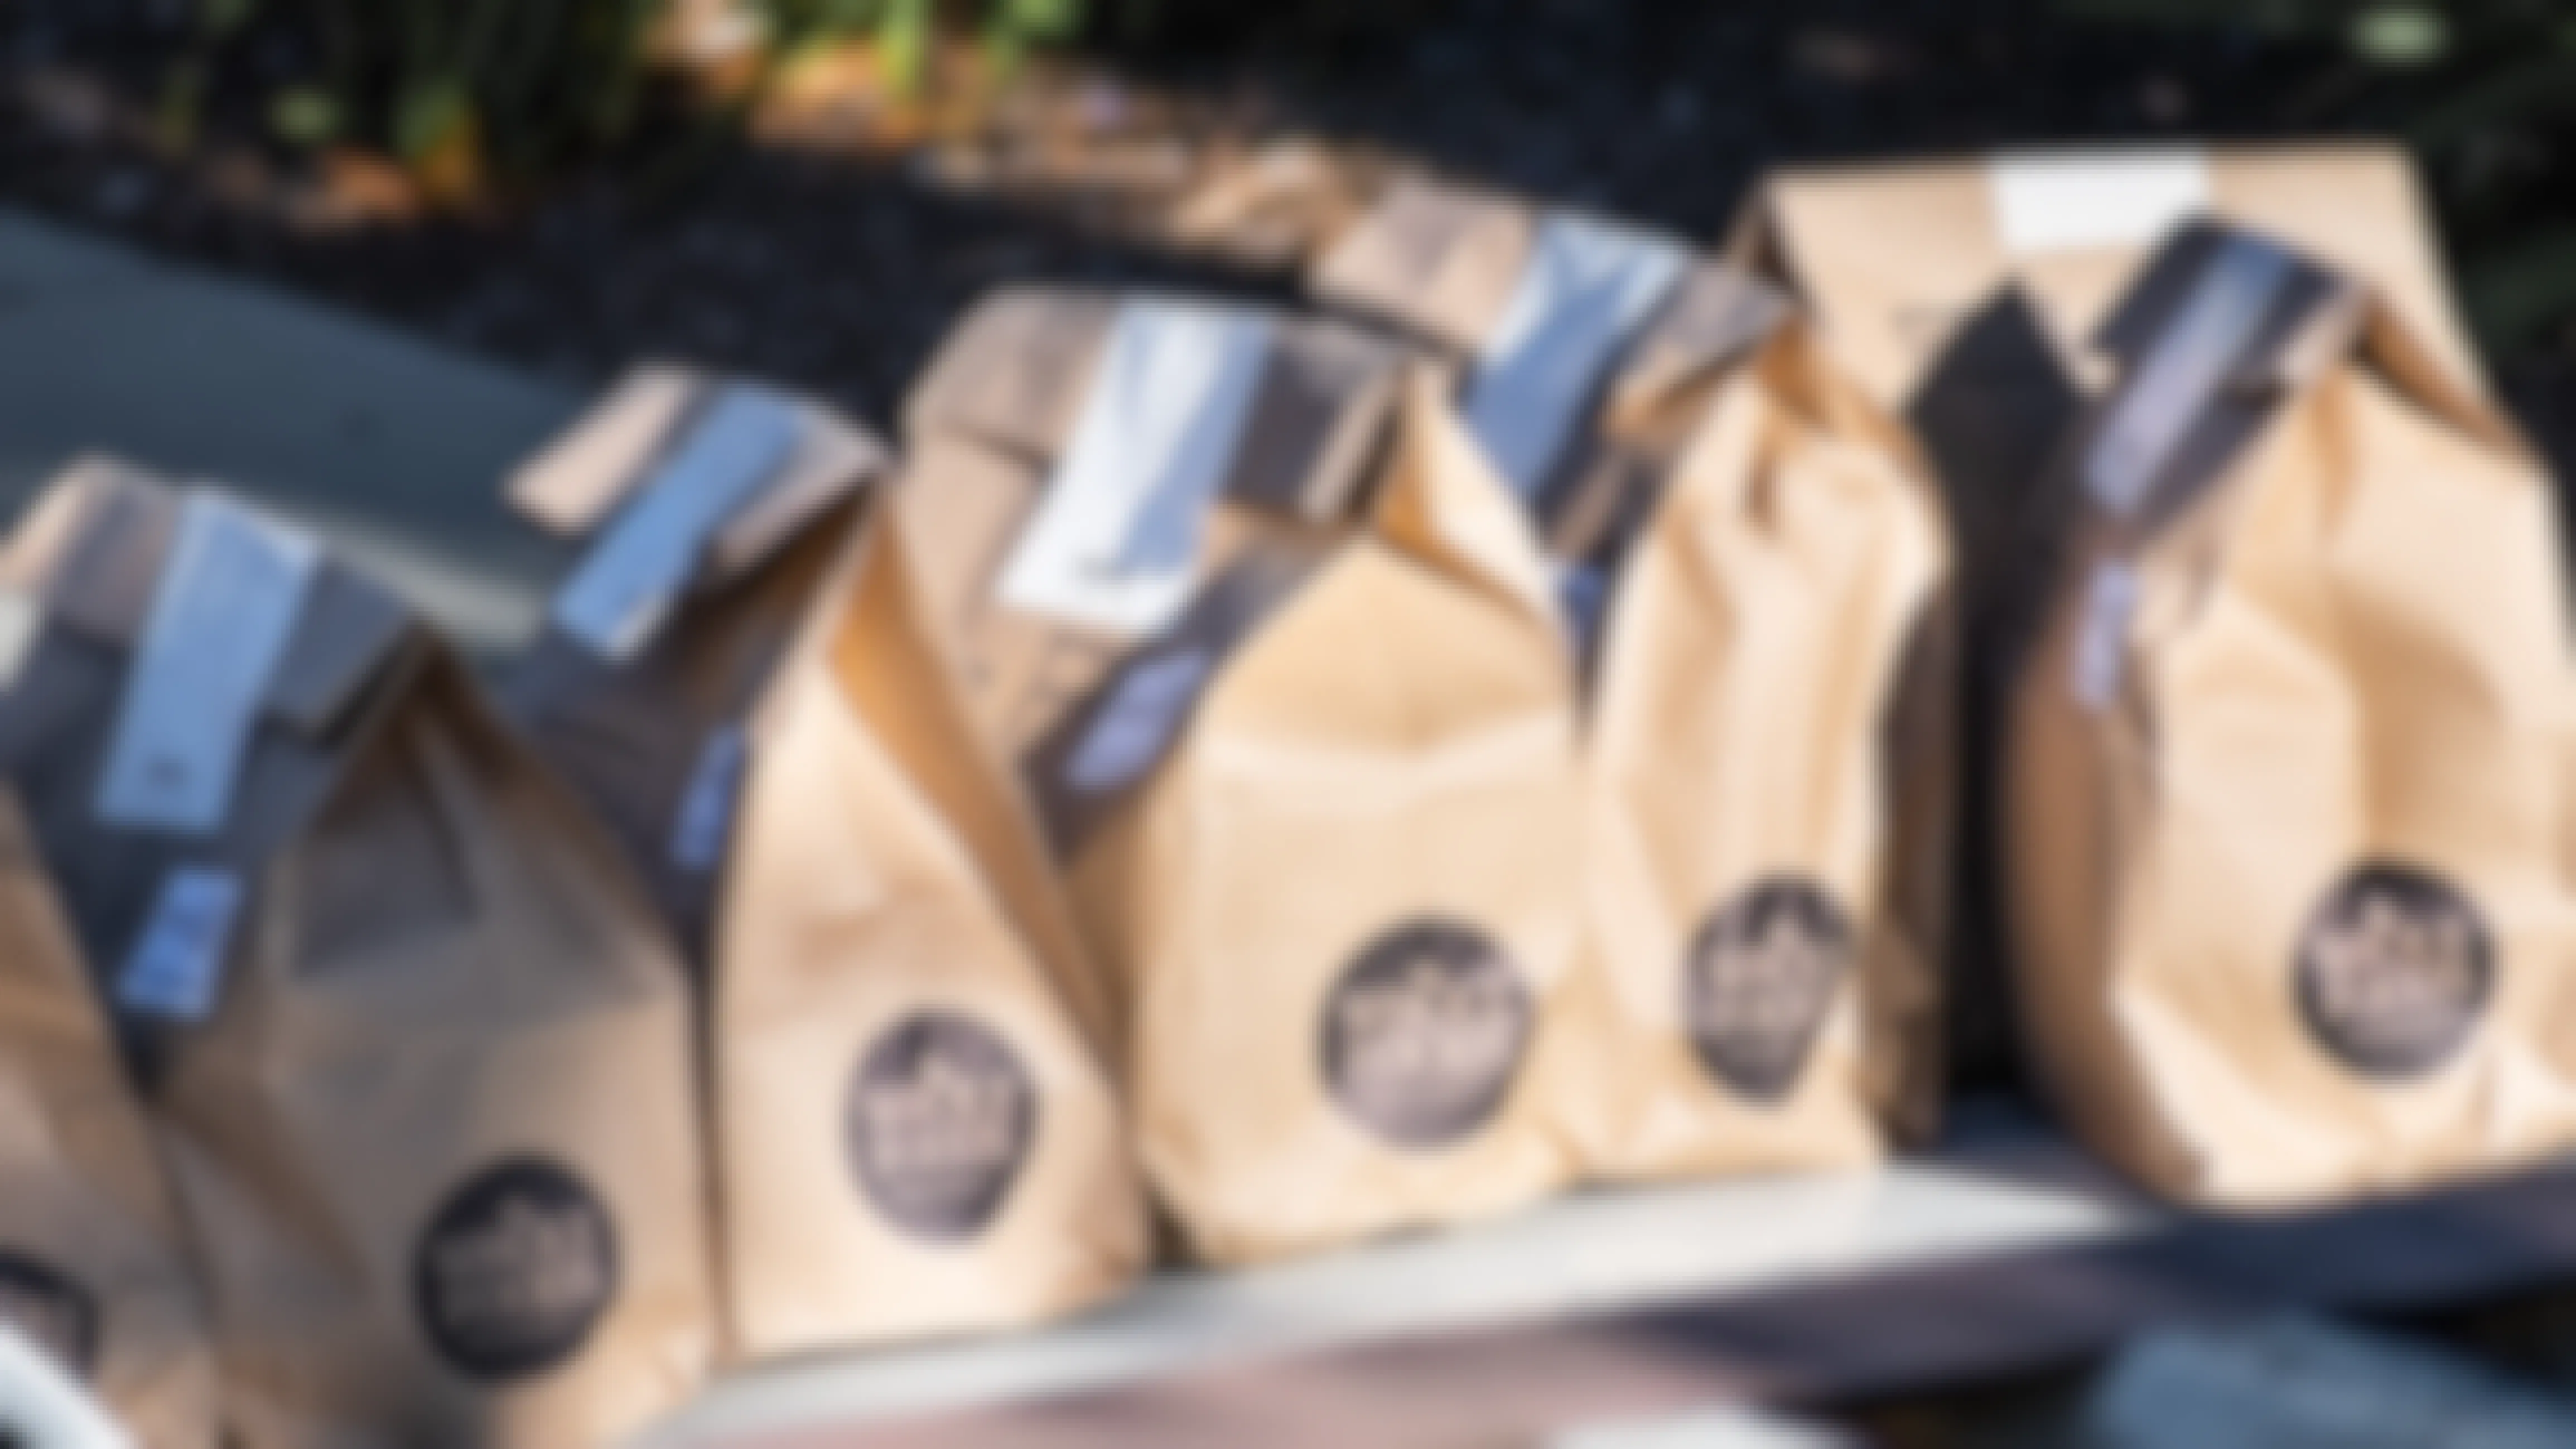 Brown paper bags with the Whole Foods logo marked on the side, lined up in a row.